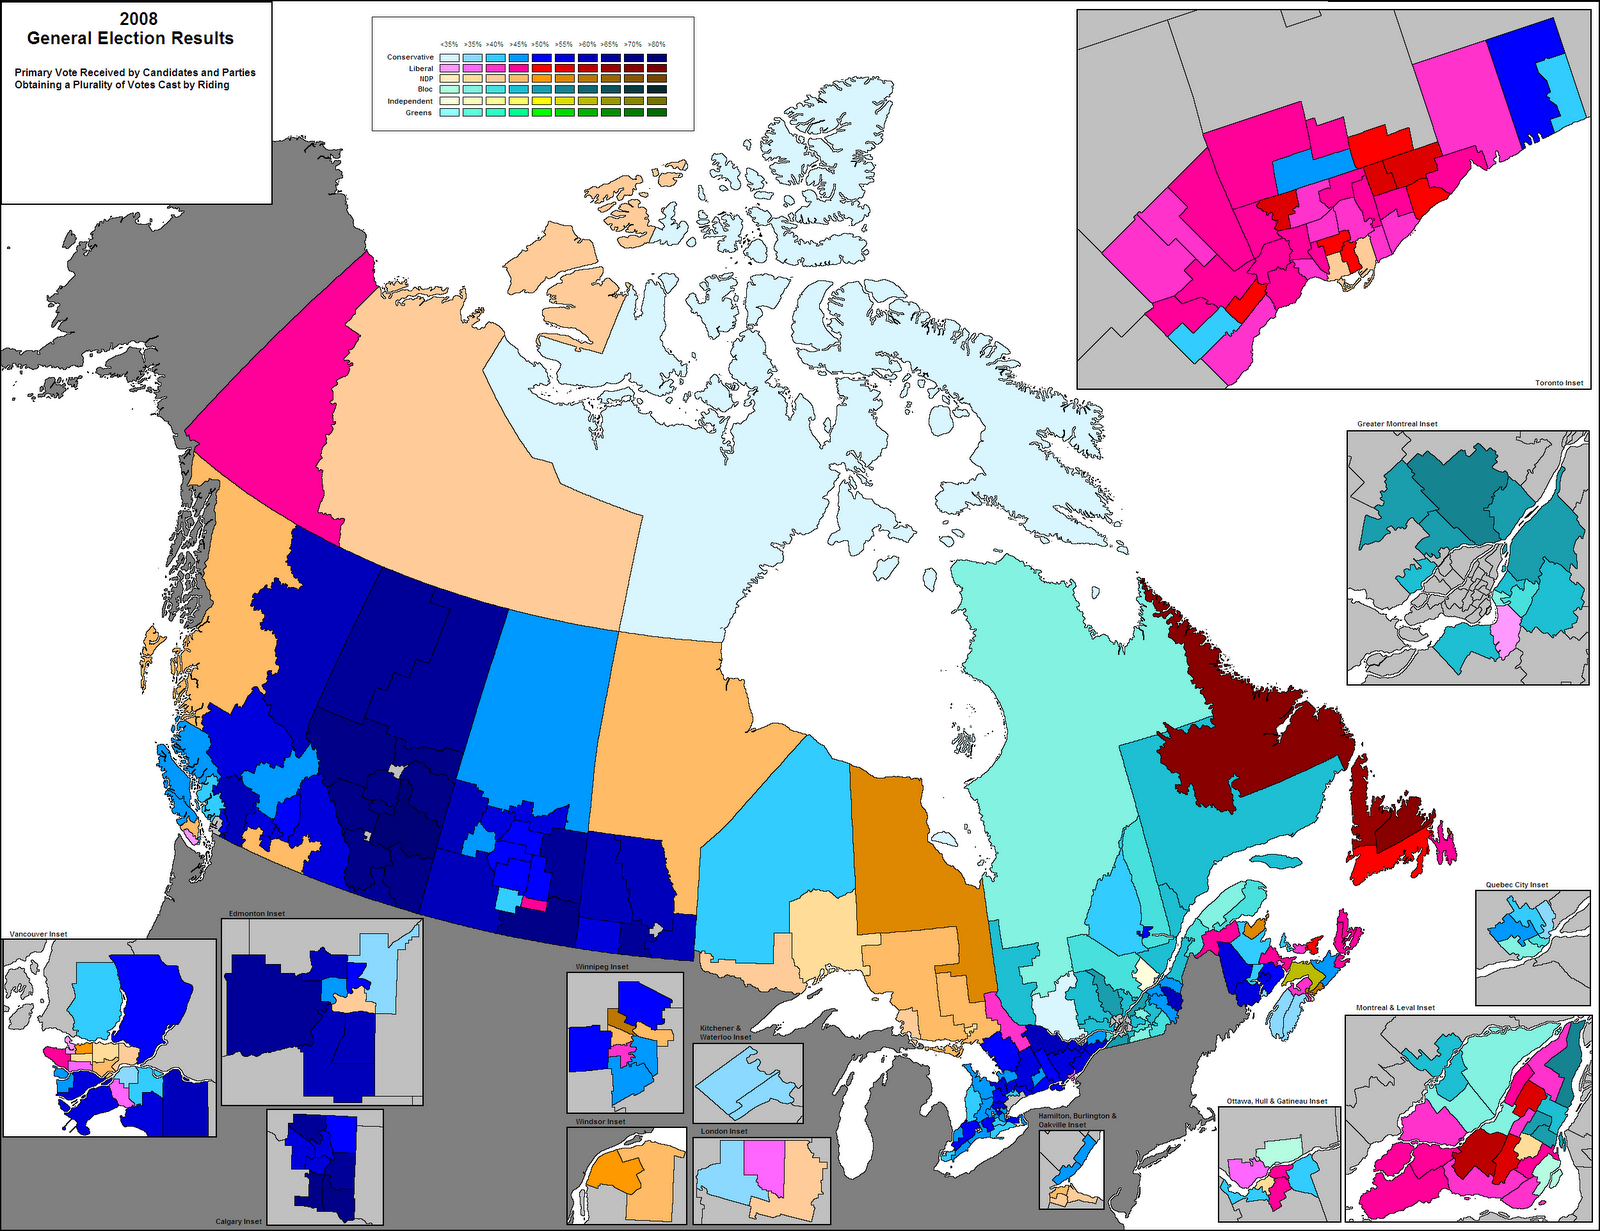 Canadian Election Atlas: Federal elections